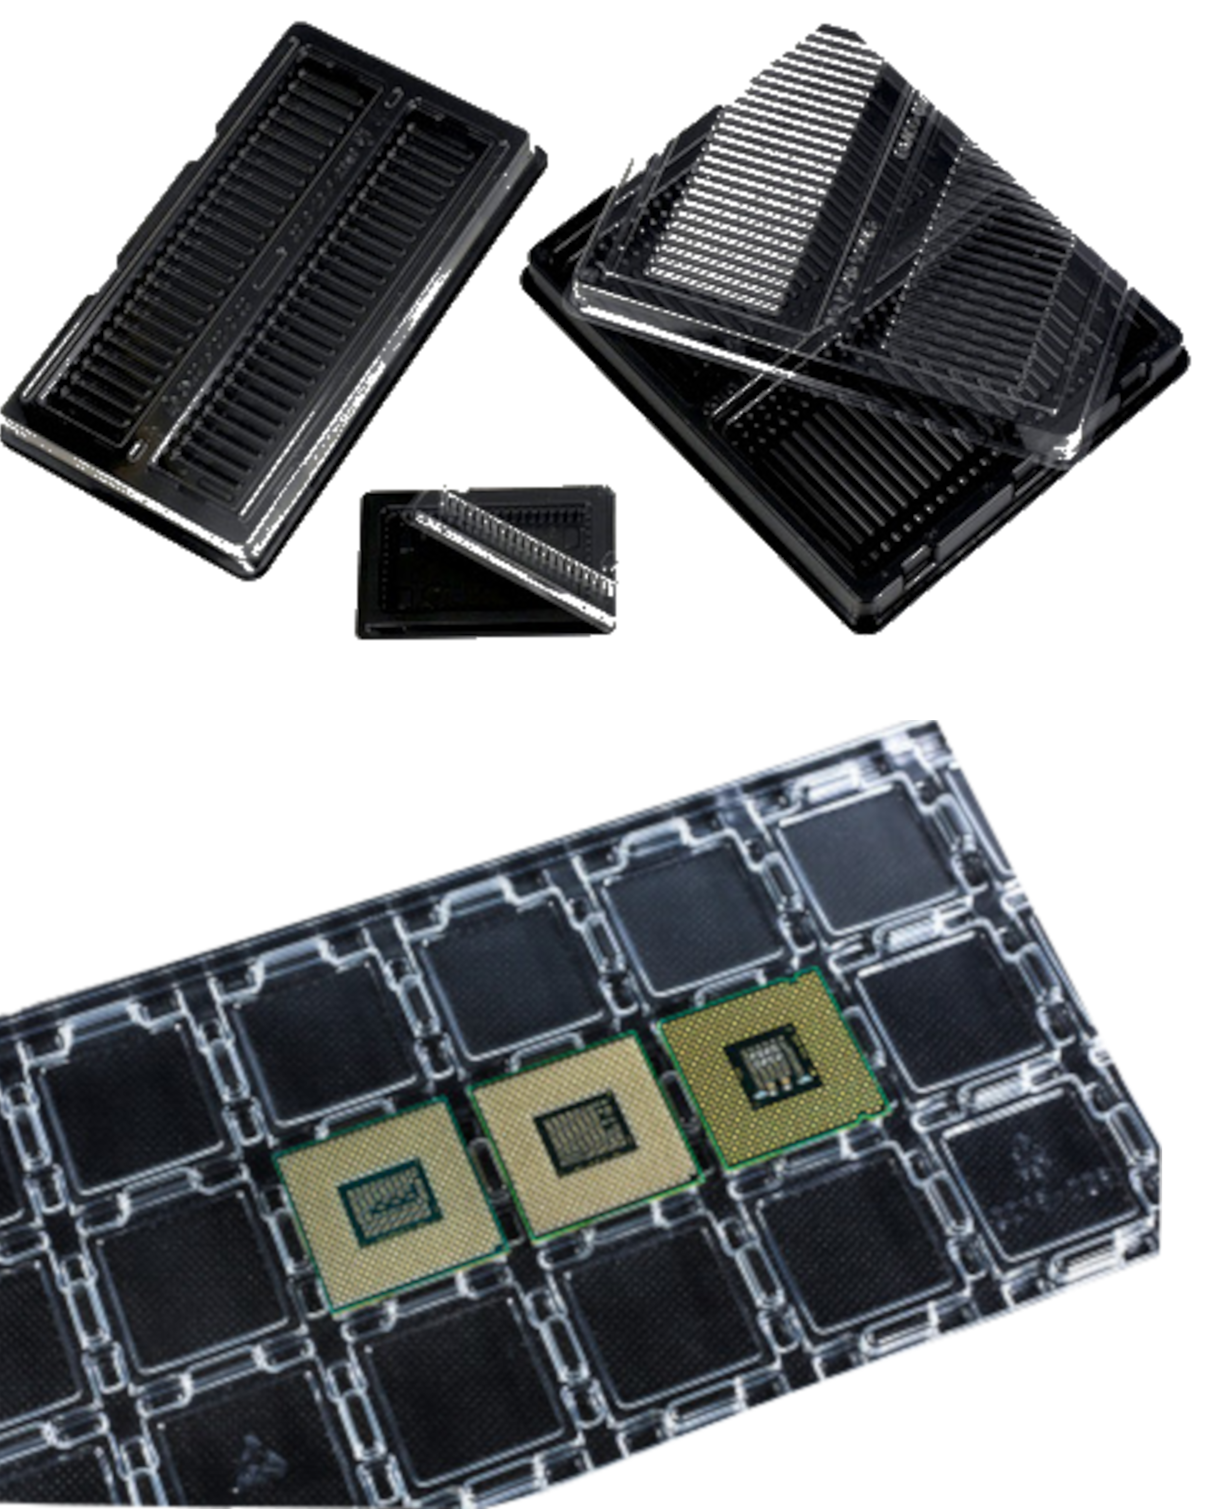 Trays for processors and RAM